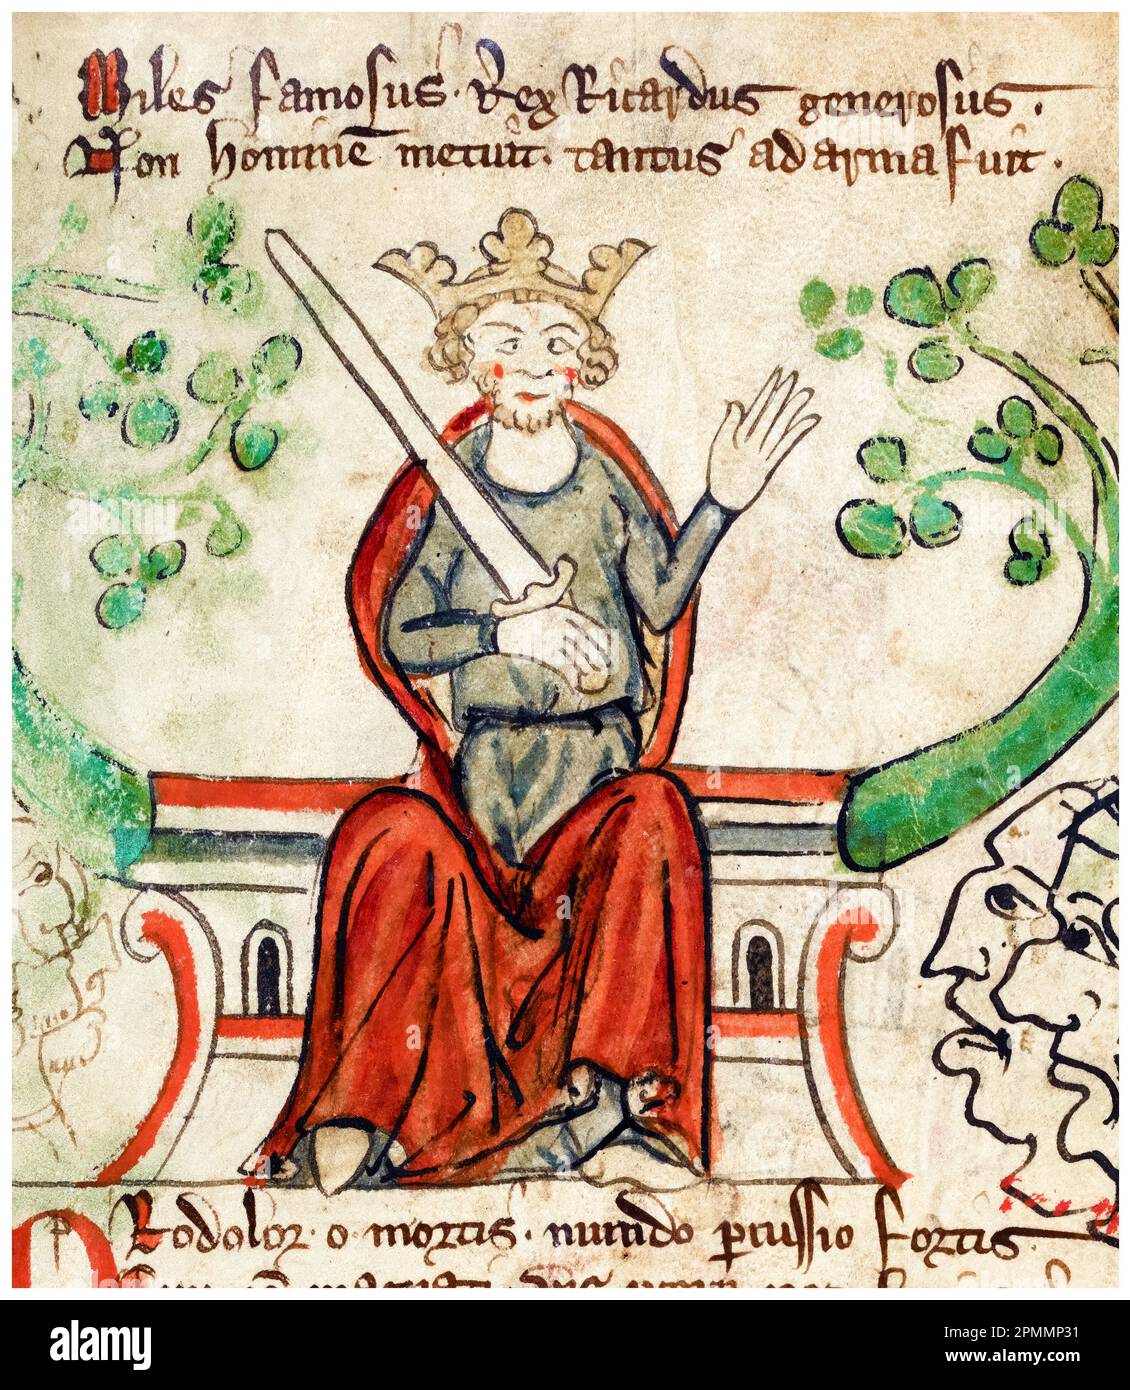 Richard The Lionheart, Richard i d'Inghilterra (1157-1199), Re d'Inghilterra, (1189-1199), dipinto manoscritto ritratto di Peter of Langtoft, 1307-1327 Foto Stock